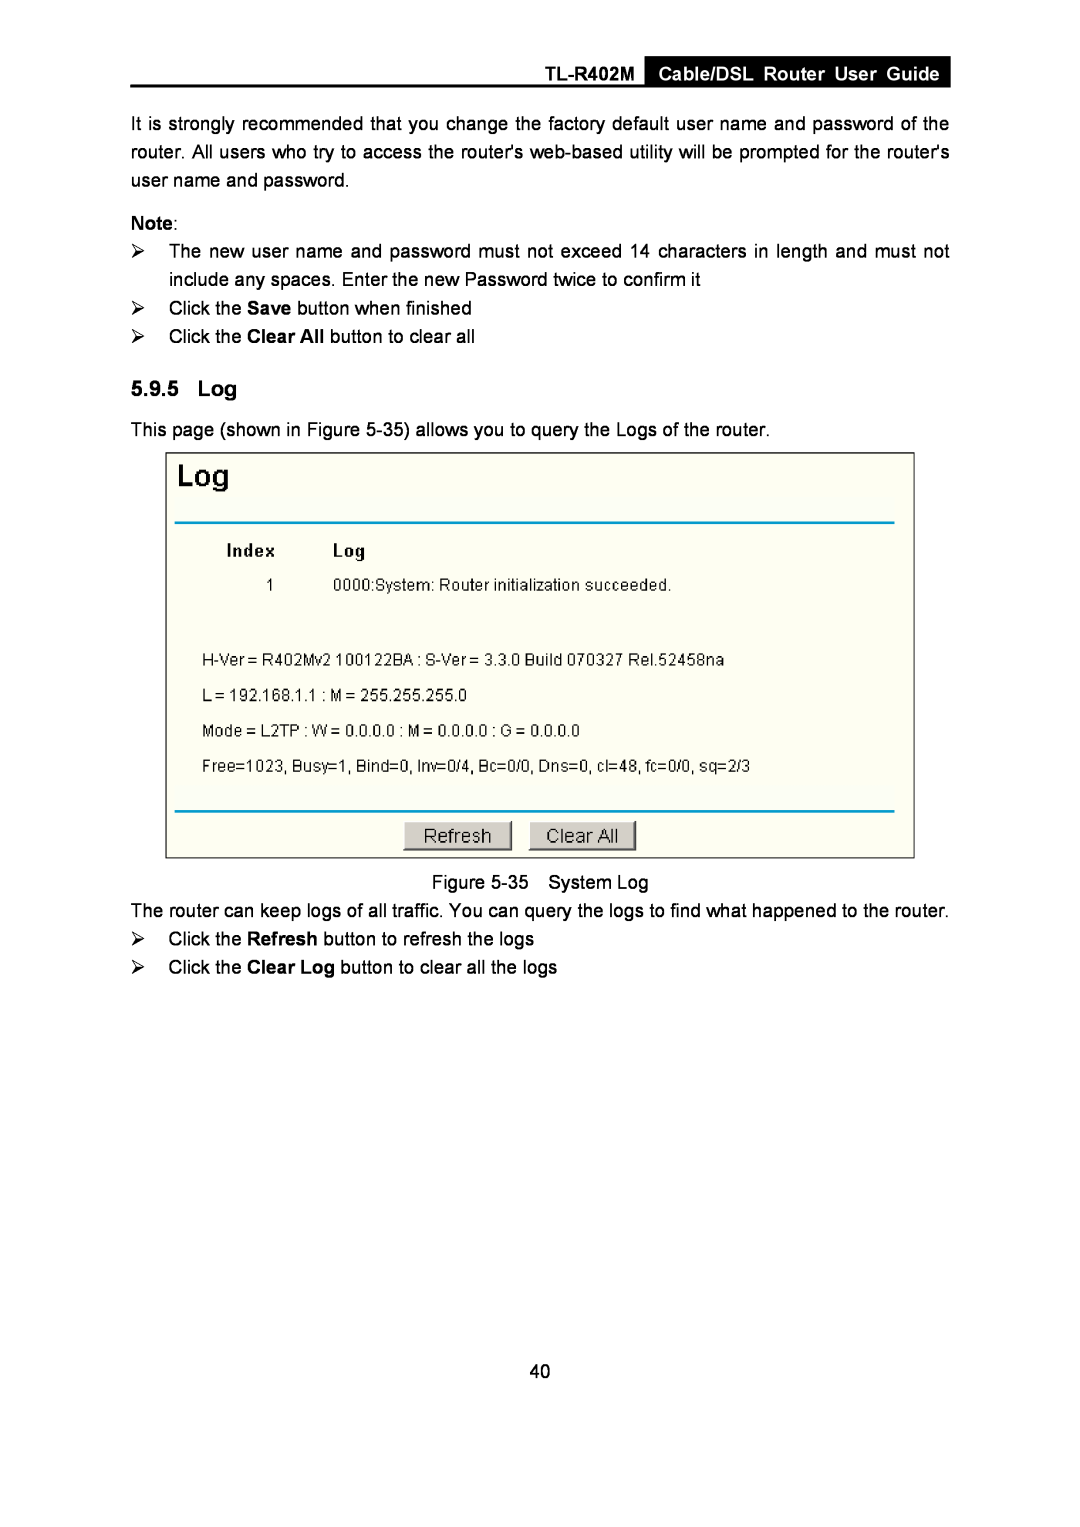 TP-Link manual 5.9.5 Log, TL-R402M Cable/DSL Router User Guide 